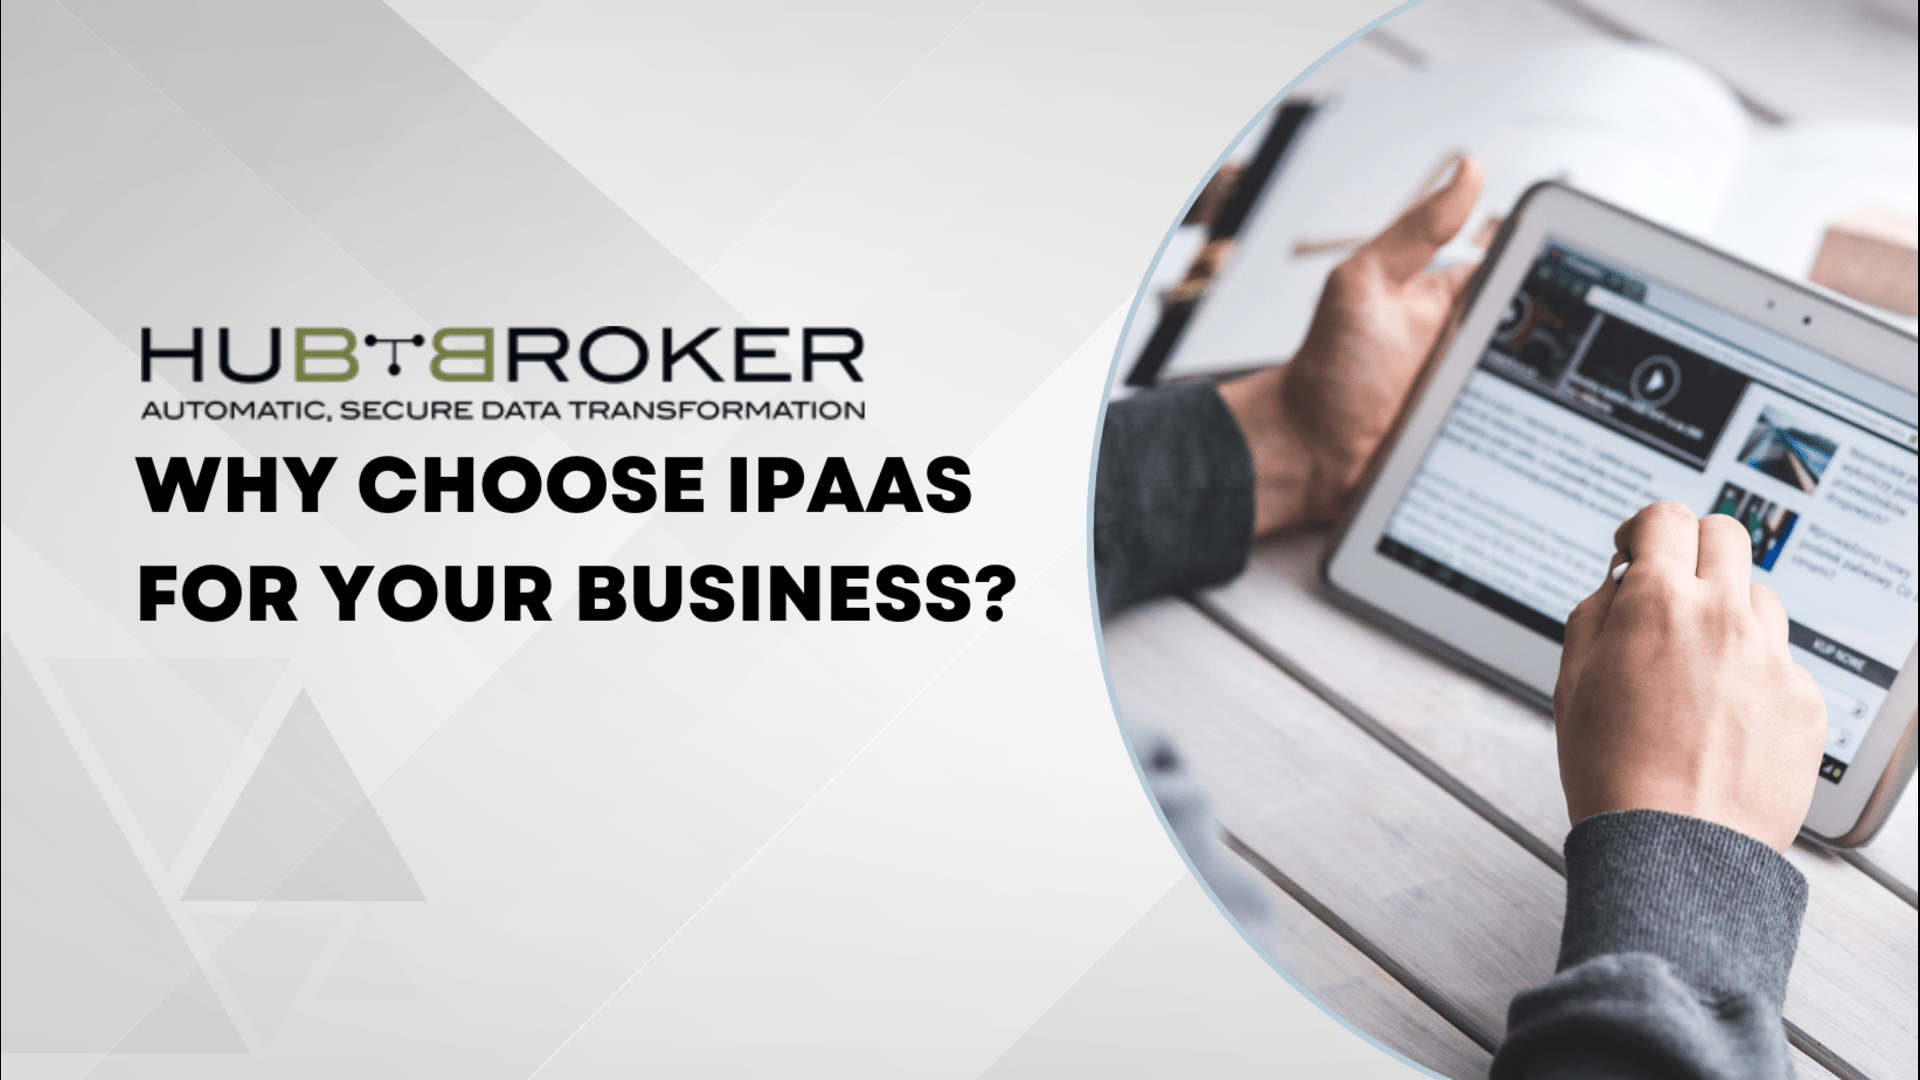 Why Choose iPaaS for Your Business?